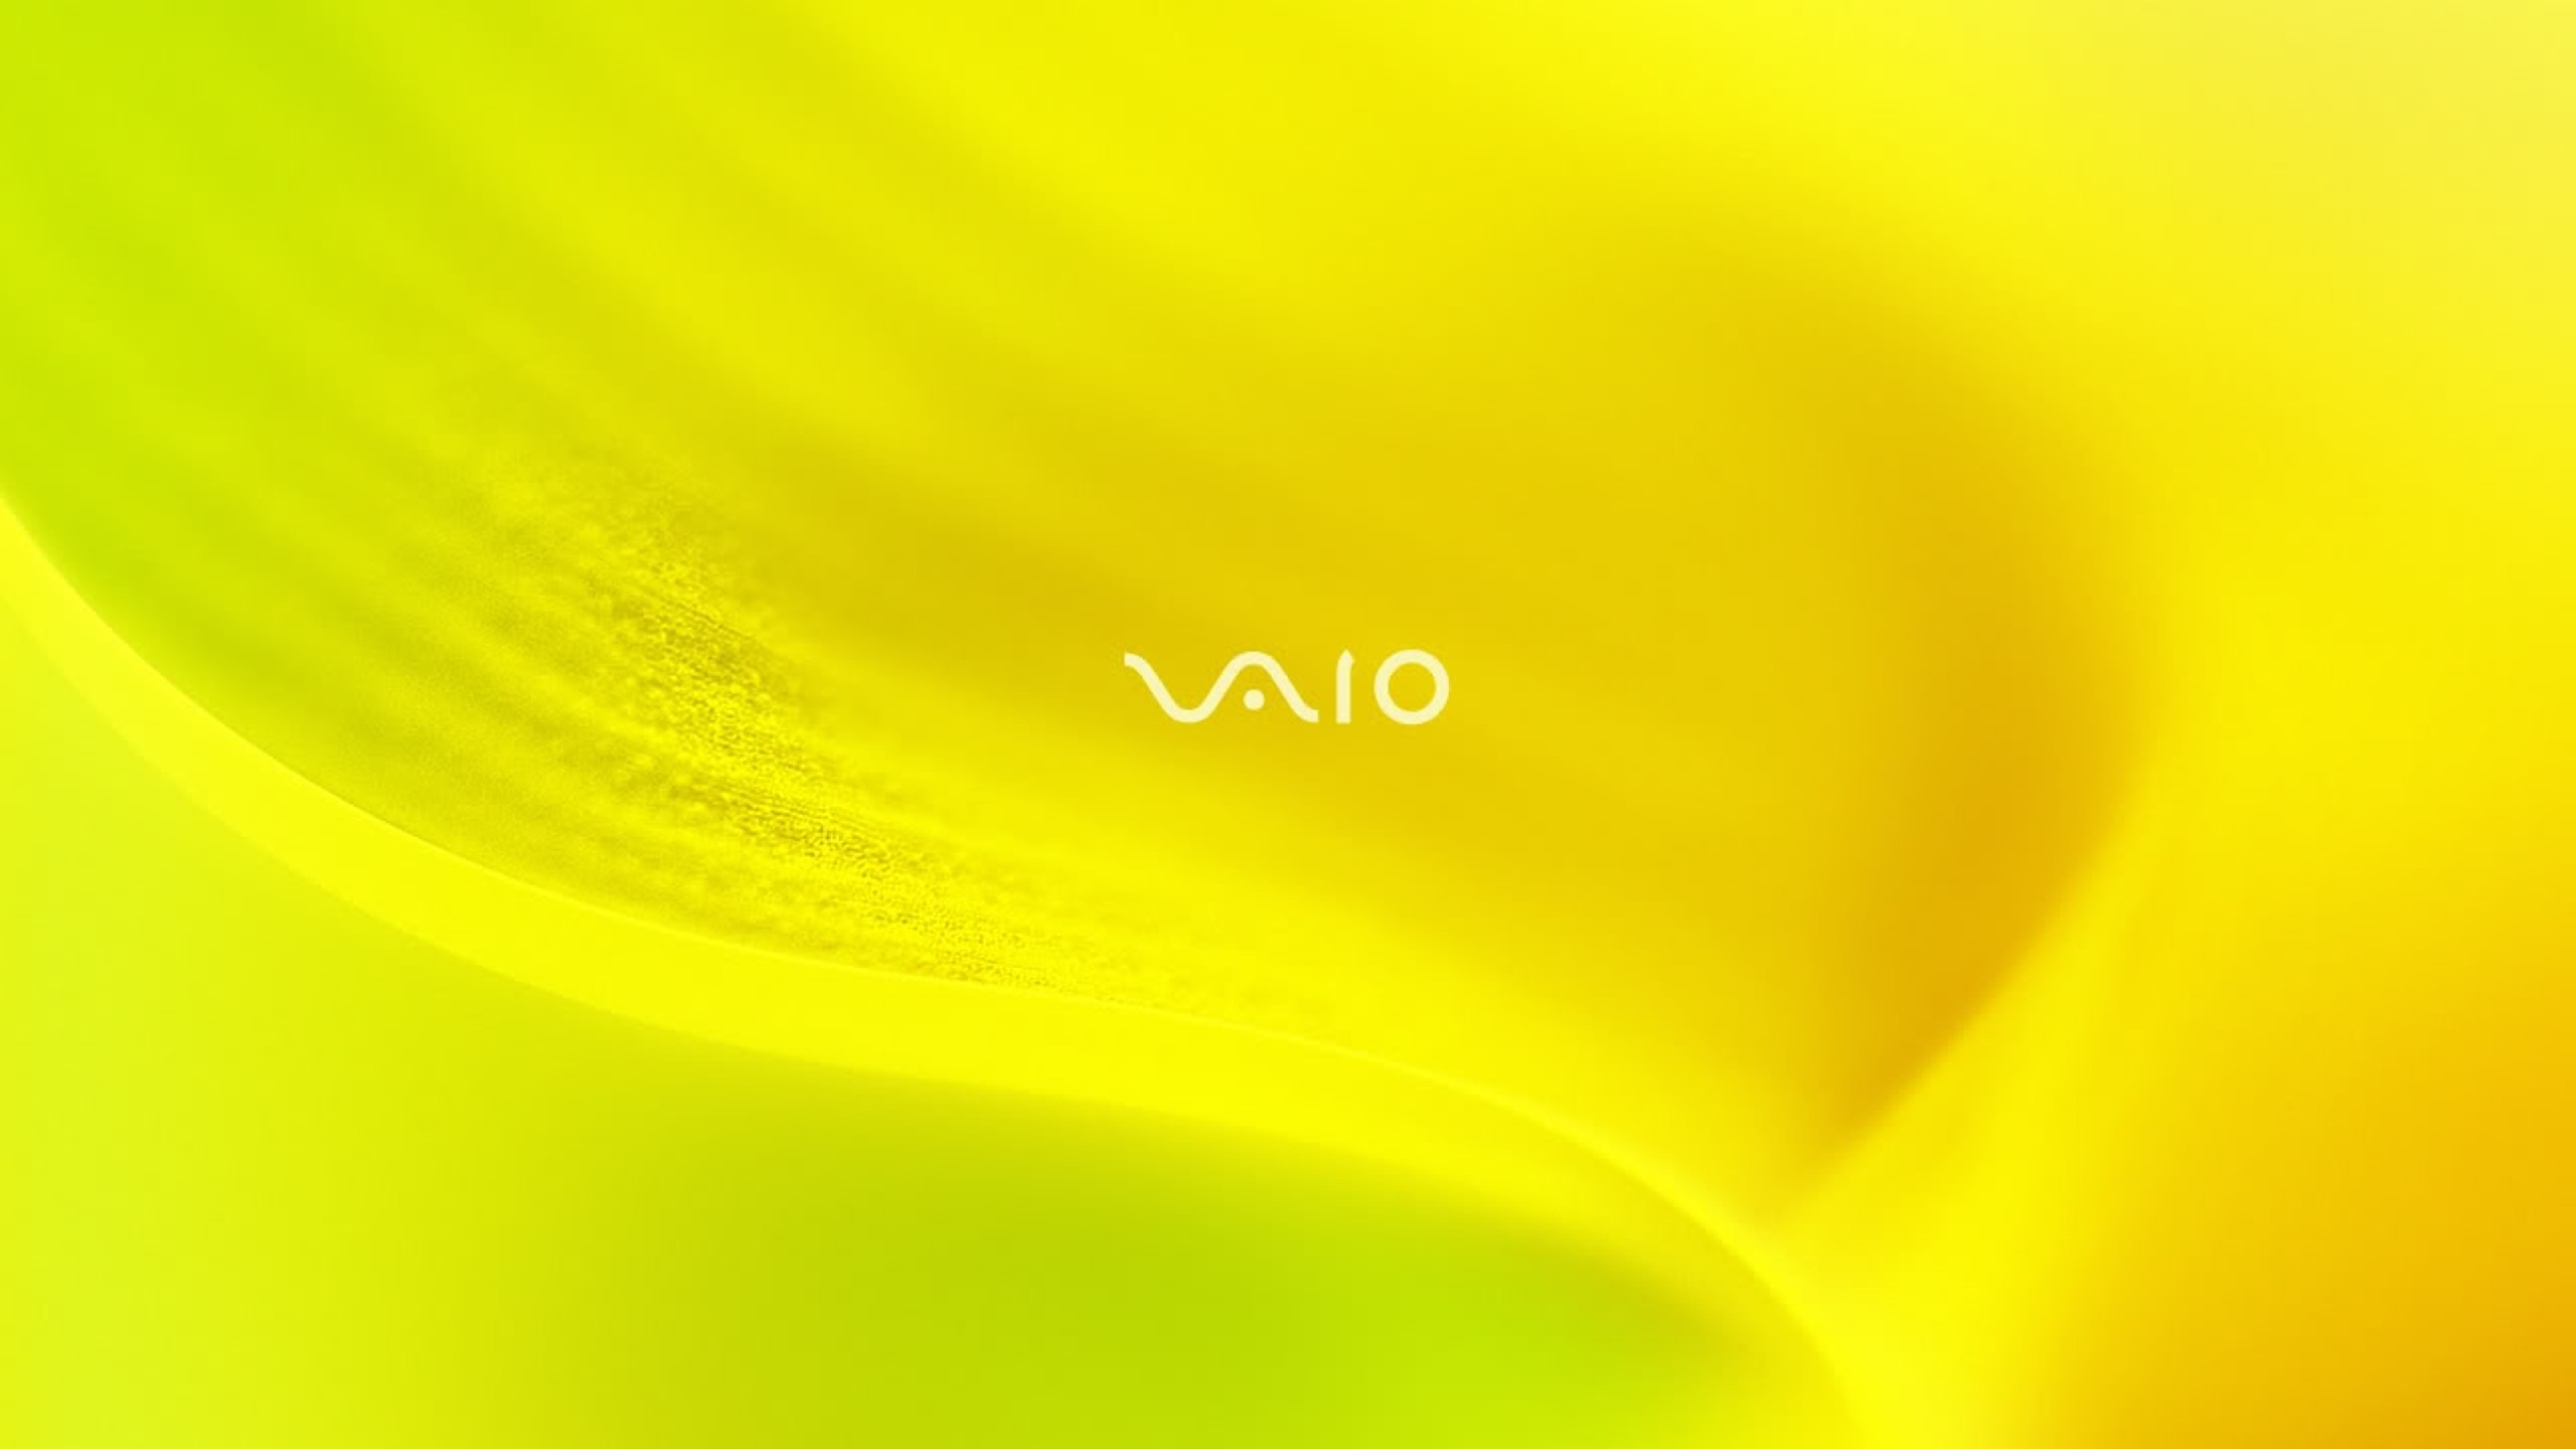 3840x2160 Sony Vaio Yellow System 4k Wallpaper Hd Hi Tech 4k Wallpapers Images Photos And Background